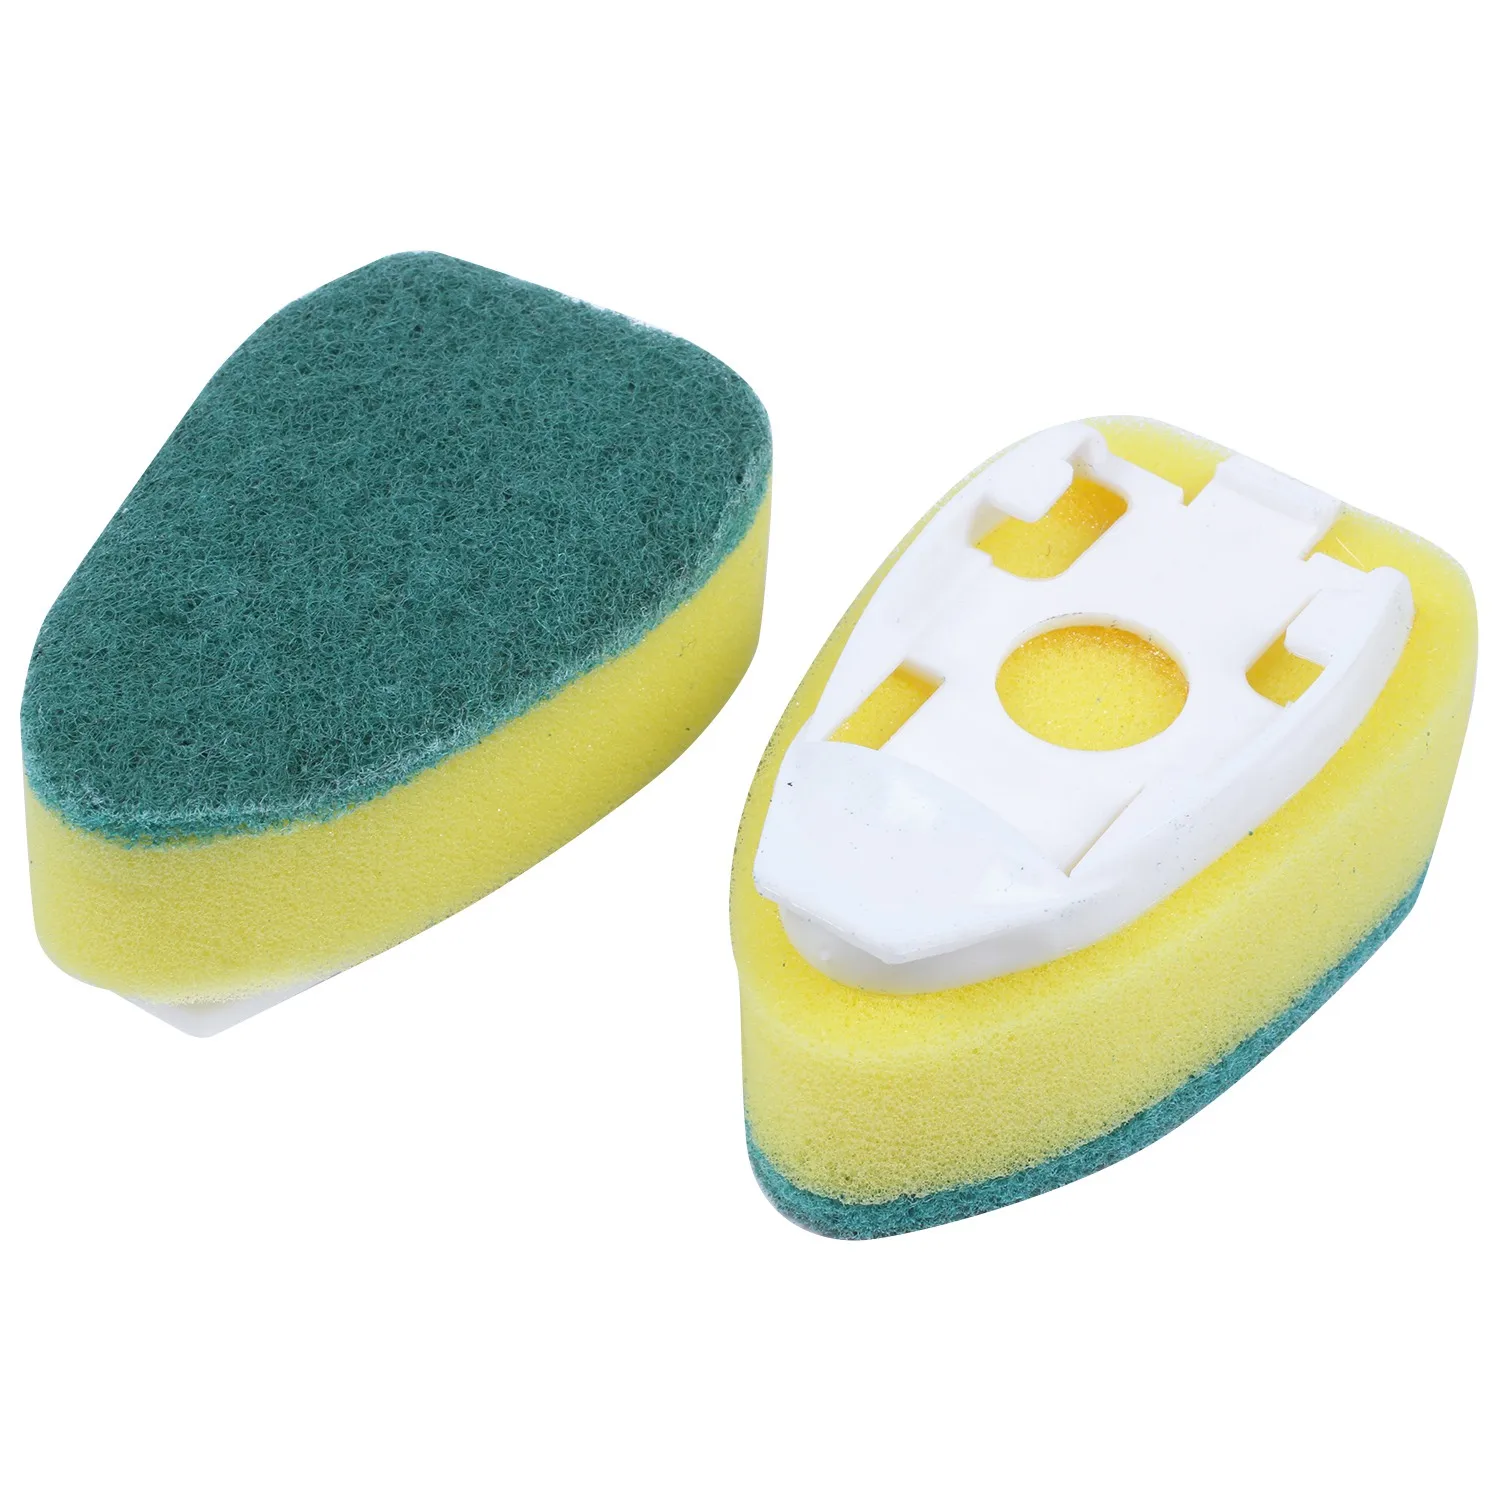 18 Pieces Dish Wand Refills Replacement Sponge Heads Scouring Scrubber Pads  Heavy Duty Dish Wand Sponge for Kitchen Sink Cleanin - AliExpress